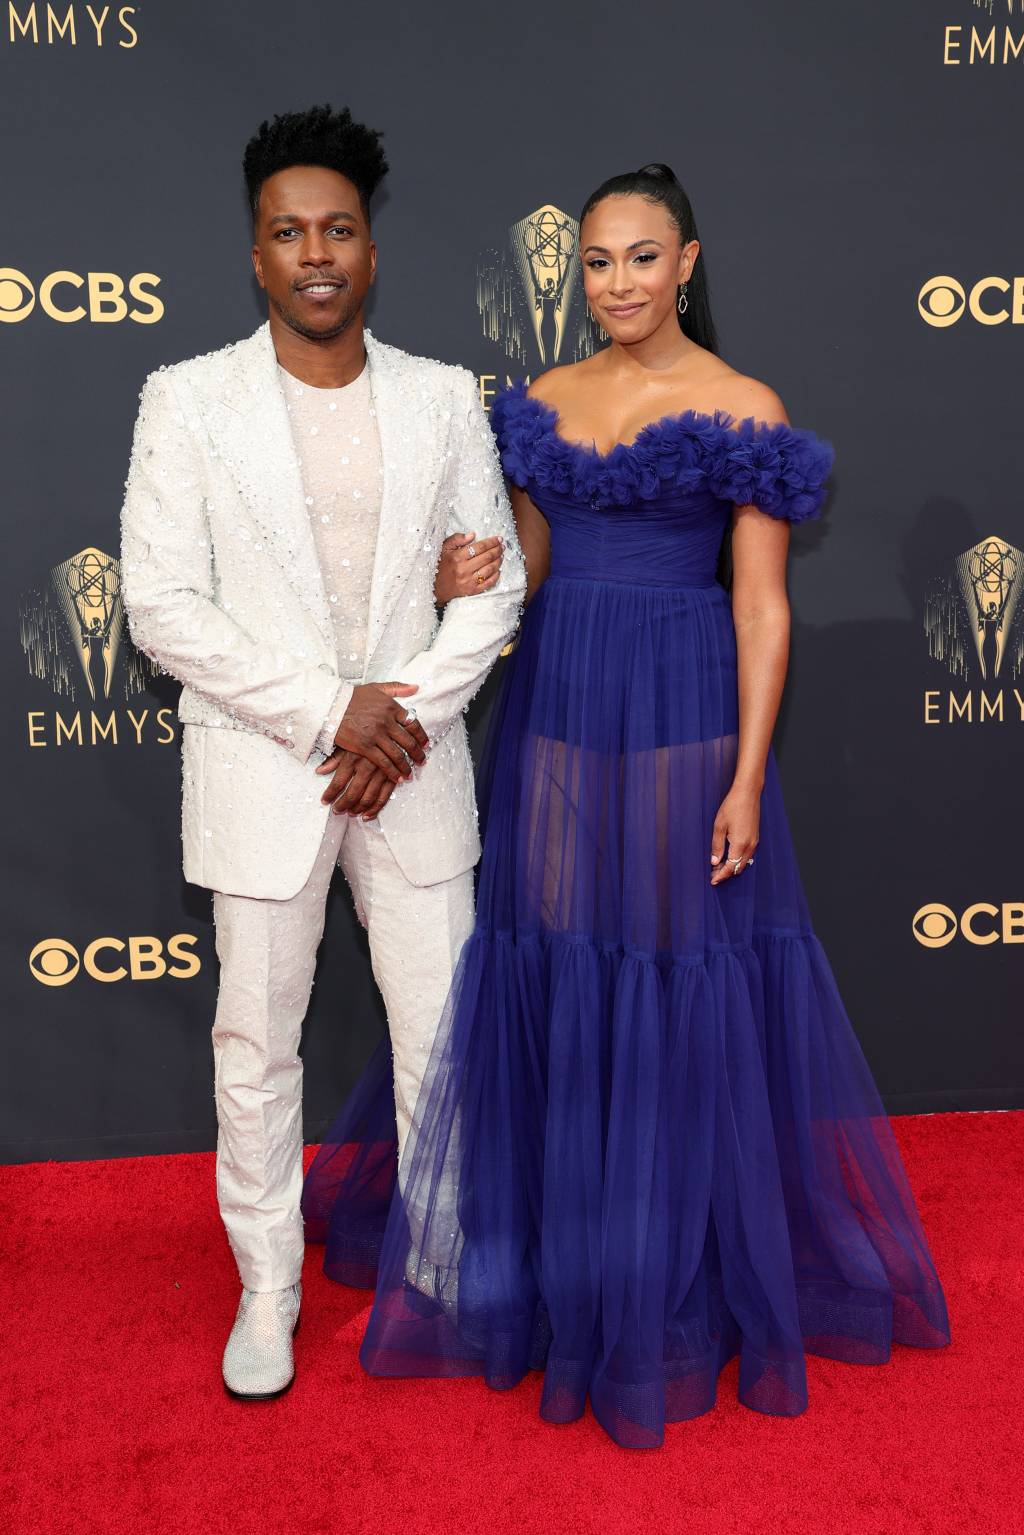 LOS ANGELES, CALIFORNIA - SEPTEMBER 19: (L-R) Leslie Odom Jr. and Nicolette Robinson attend the 73rd Primetime Emmy Awards at L.A. LIVE on September 19, 2021 in Los Angeles, California. (Photo by Rich Fury/Getty Images)